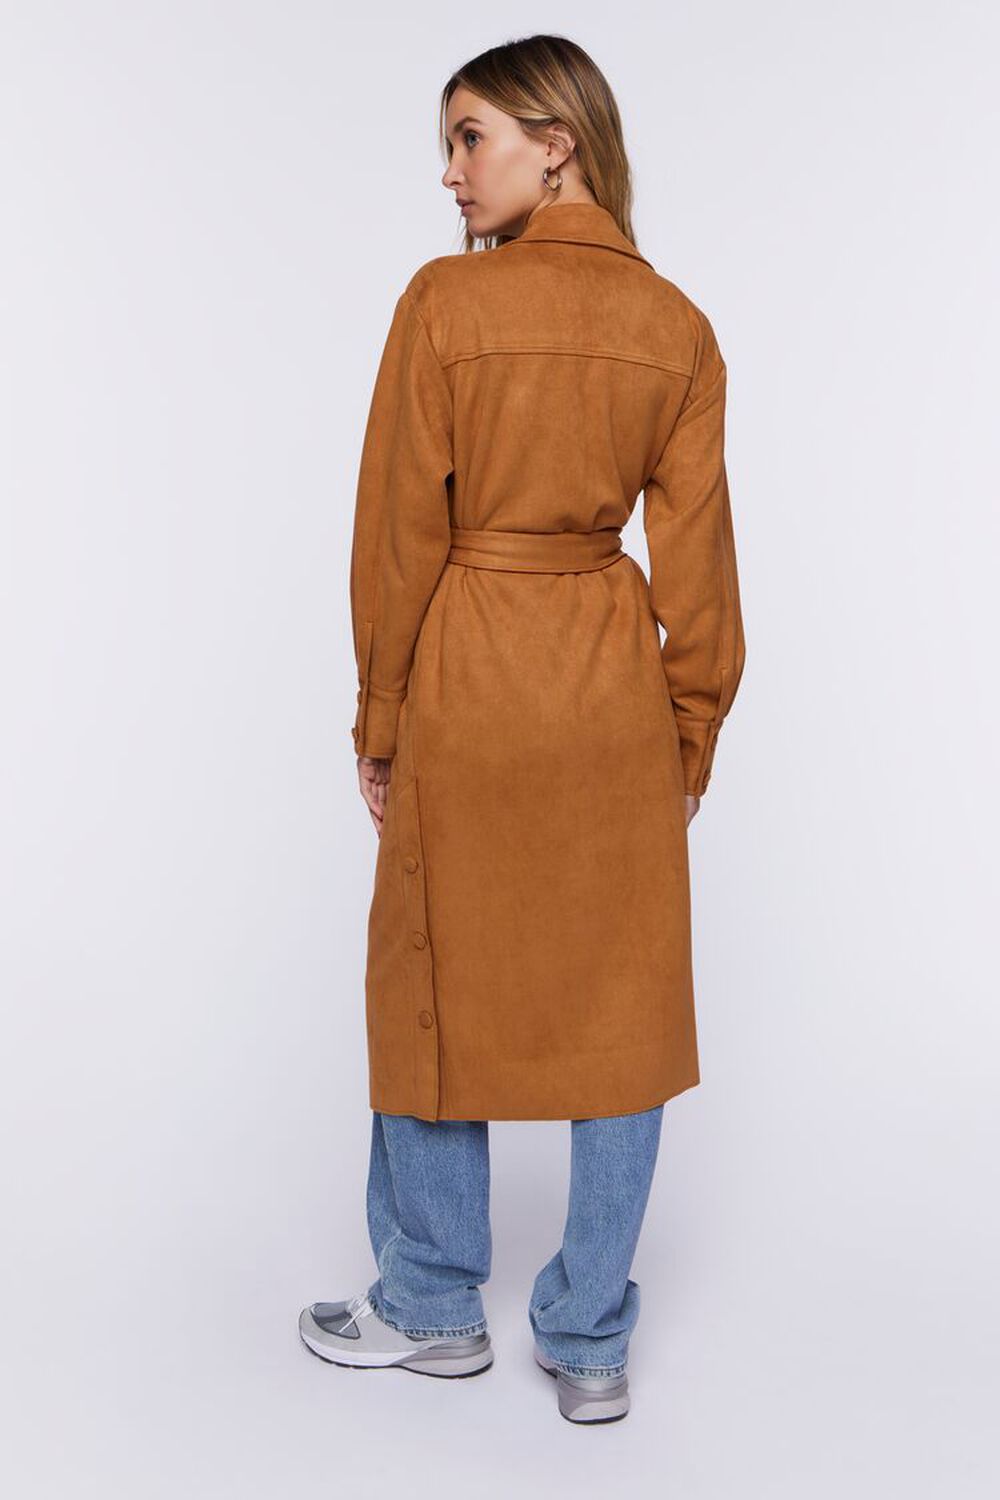 CAMEL Faux Suede Belted Trench Coat, image 3